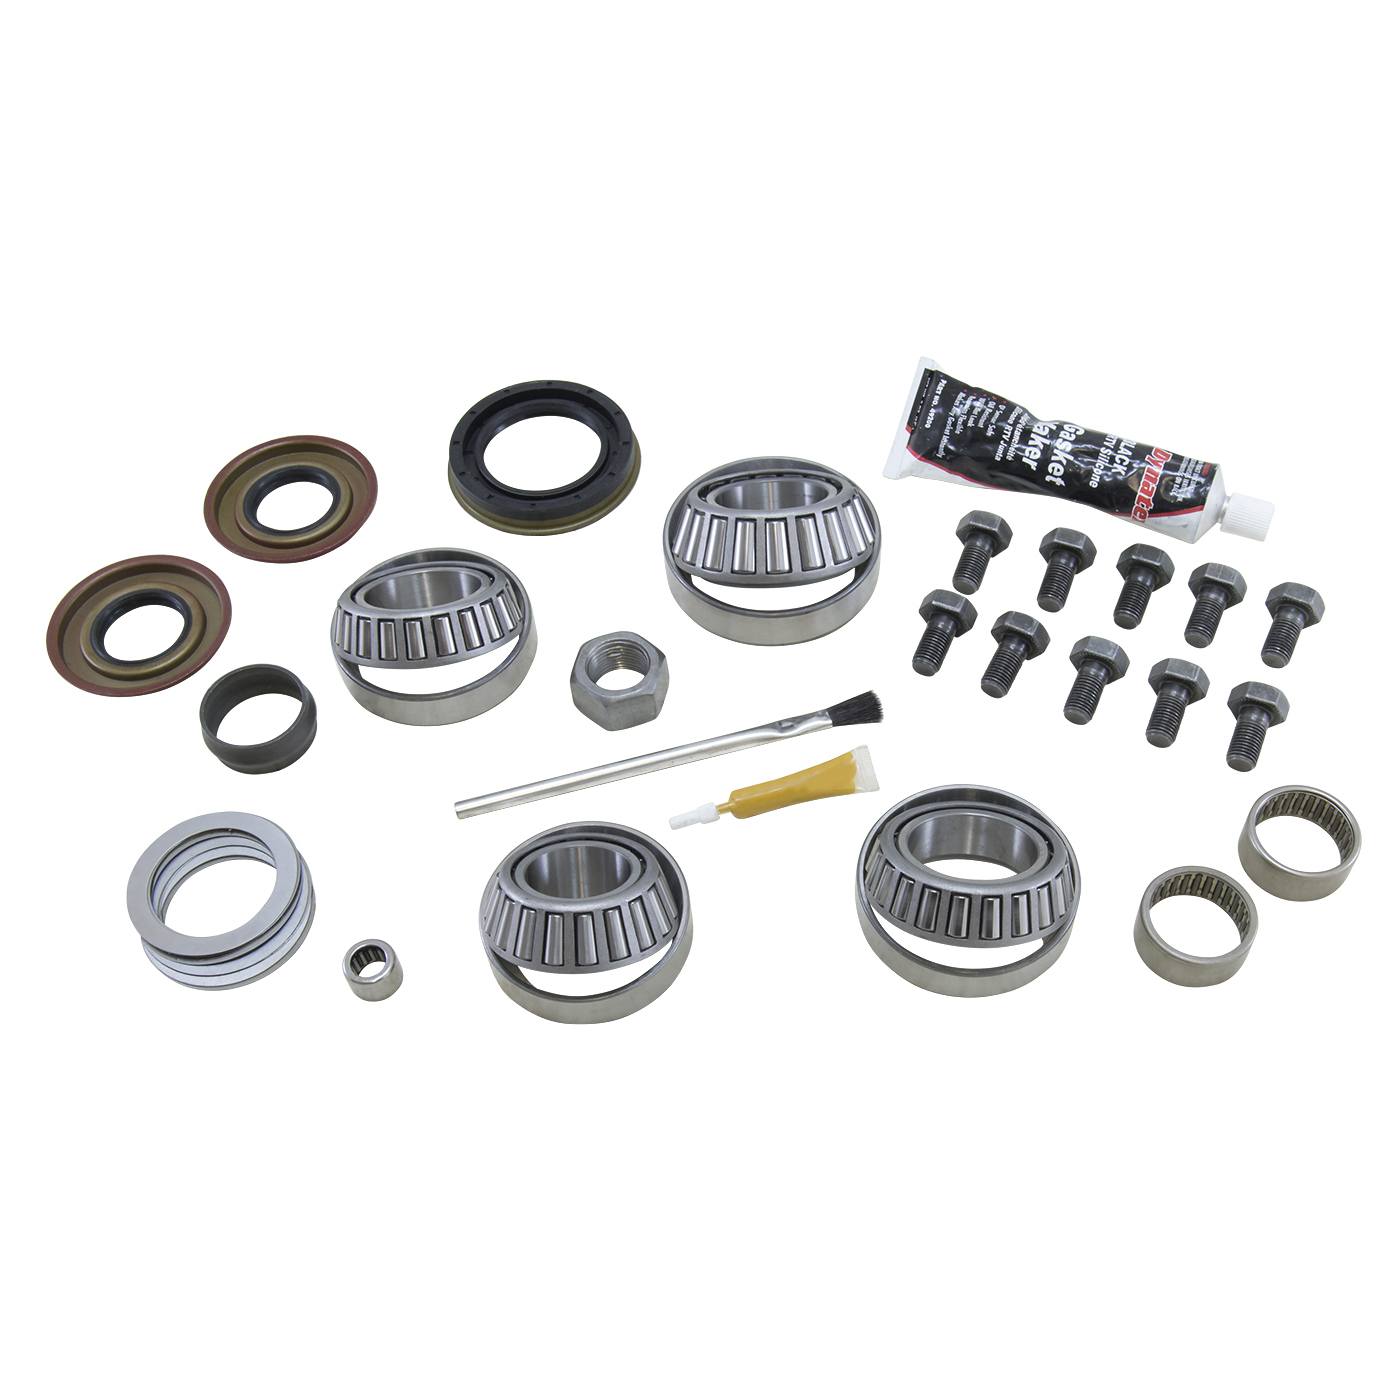 Yukon Master Overhaul kit for '98 and older GM 8.25" IFS differential 